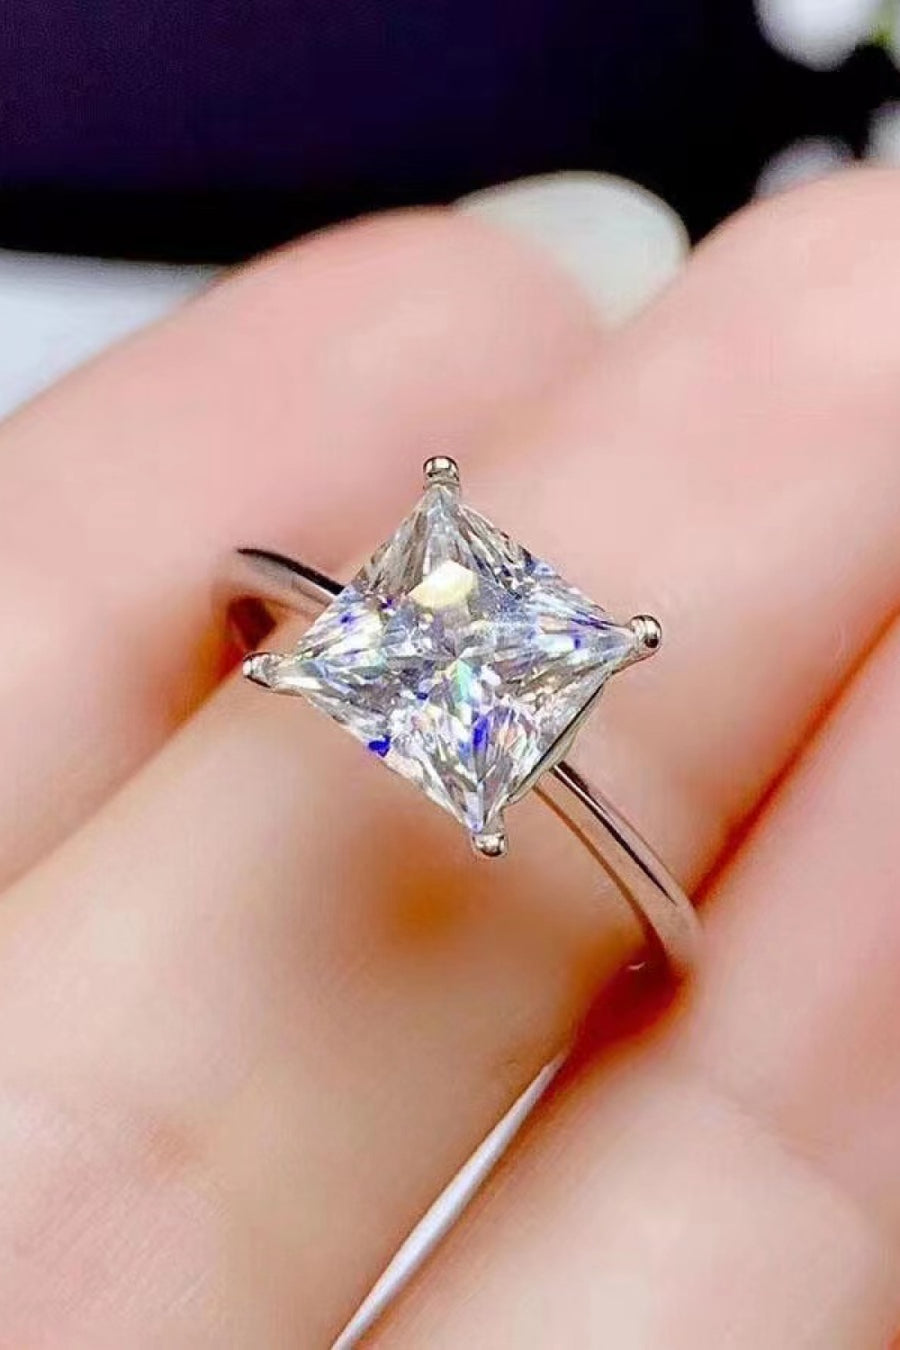 Moissanite solitaire ring, Lab-created gemstone, 5-carat statement piece, Sparkling centerpiece, Timeless elegance, Luxury jewelry, Classic design, High-quality craftsmanship, Affordable glamour, Fine jewelry accessory.